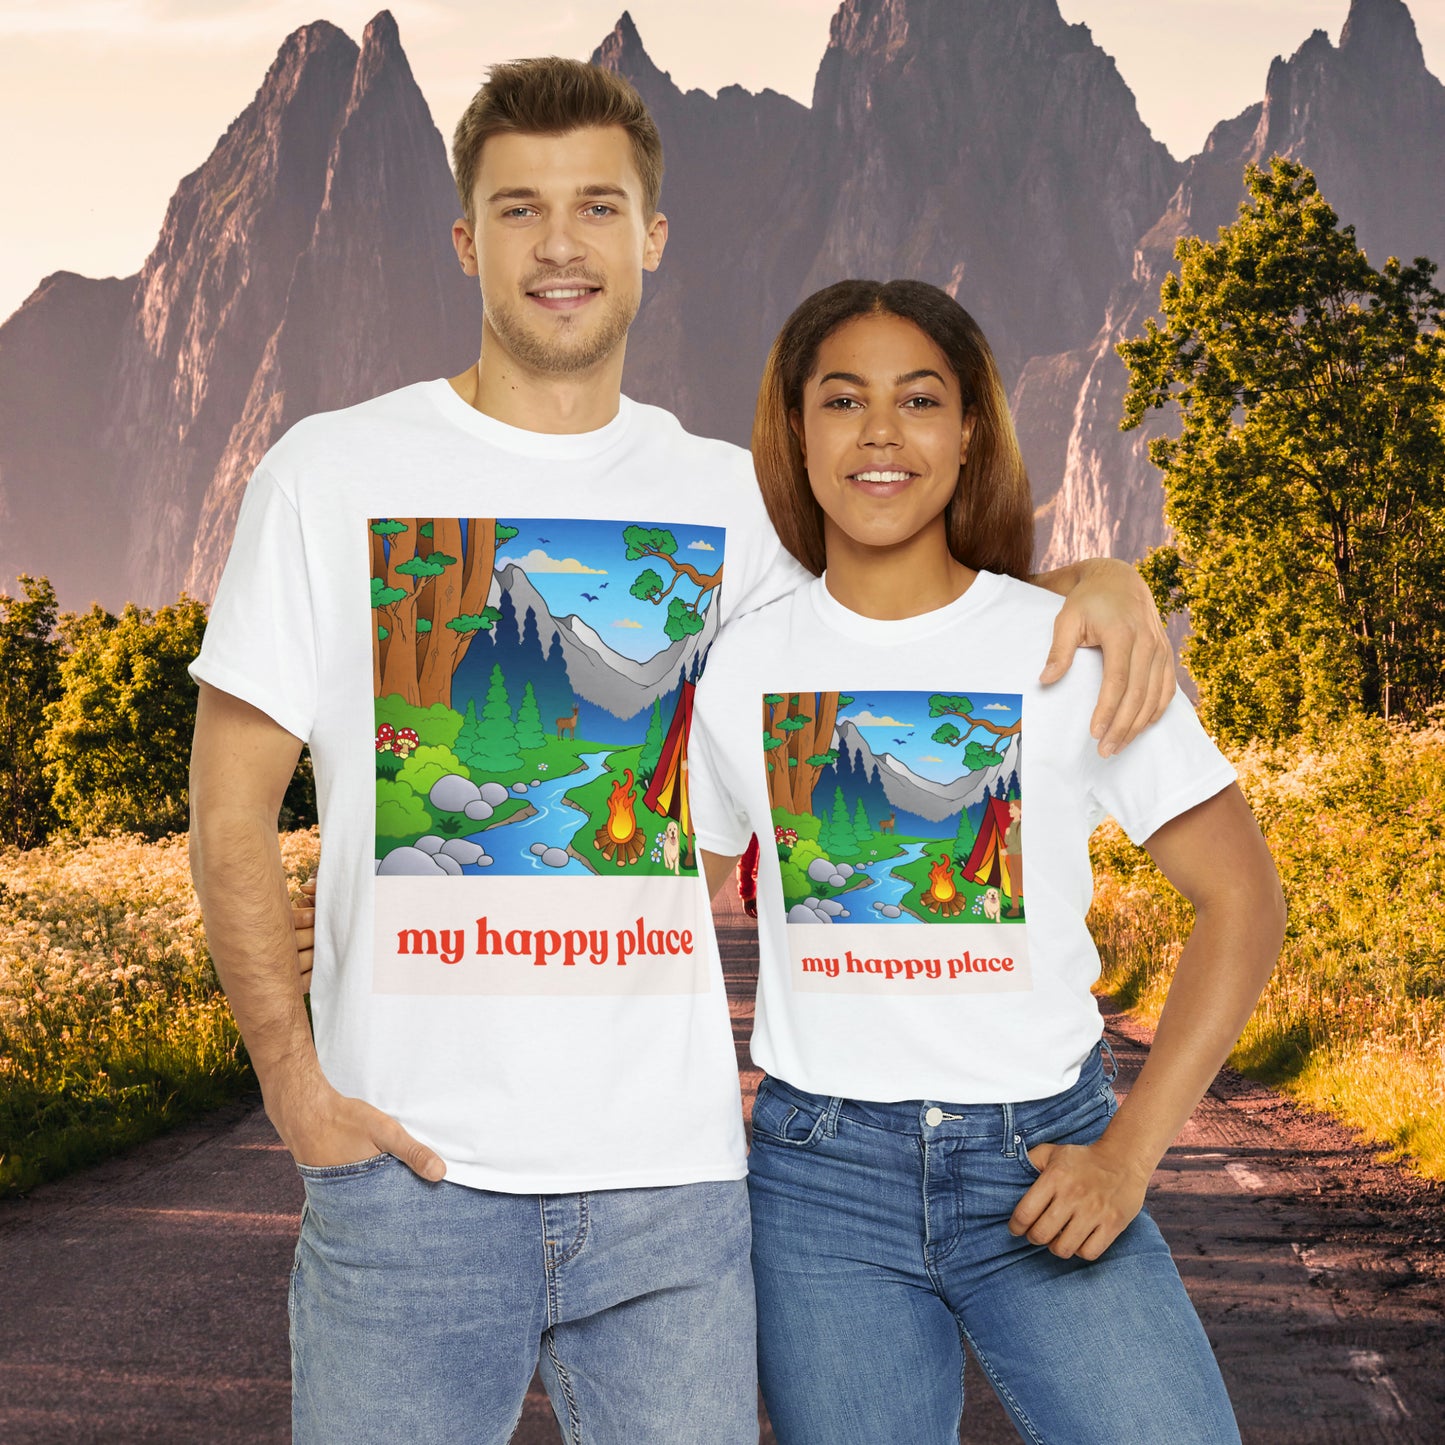 A great shirt for those who love camping in the great outdoors! This Unisex Heavy Cotton Tee is designed to inspire us to spend more time being happy in the great outdoors. Camp, hike and be one with nature.